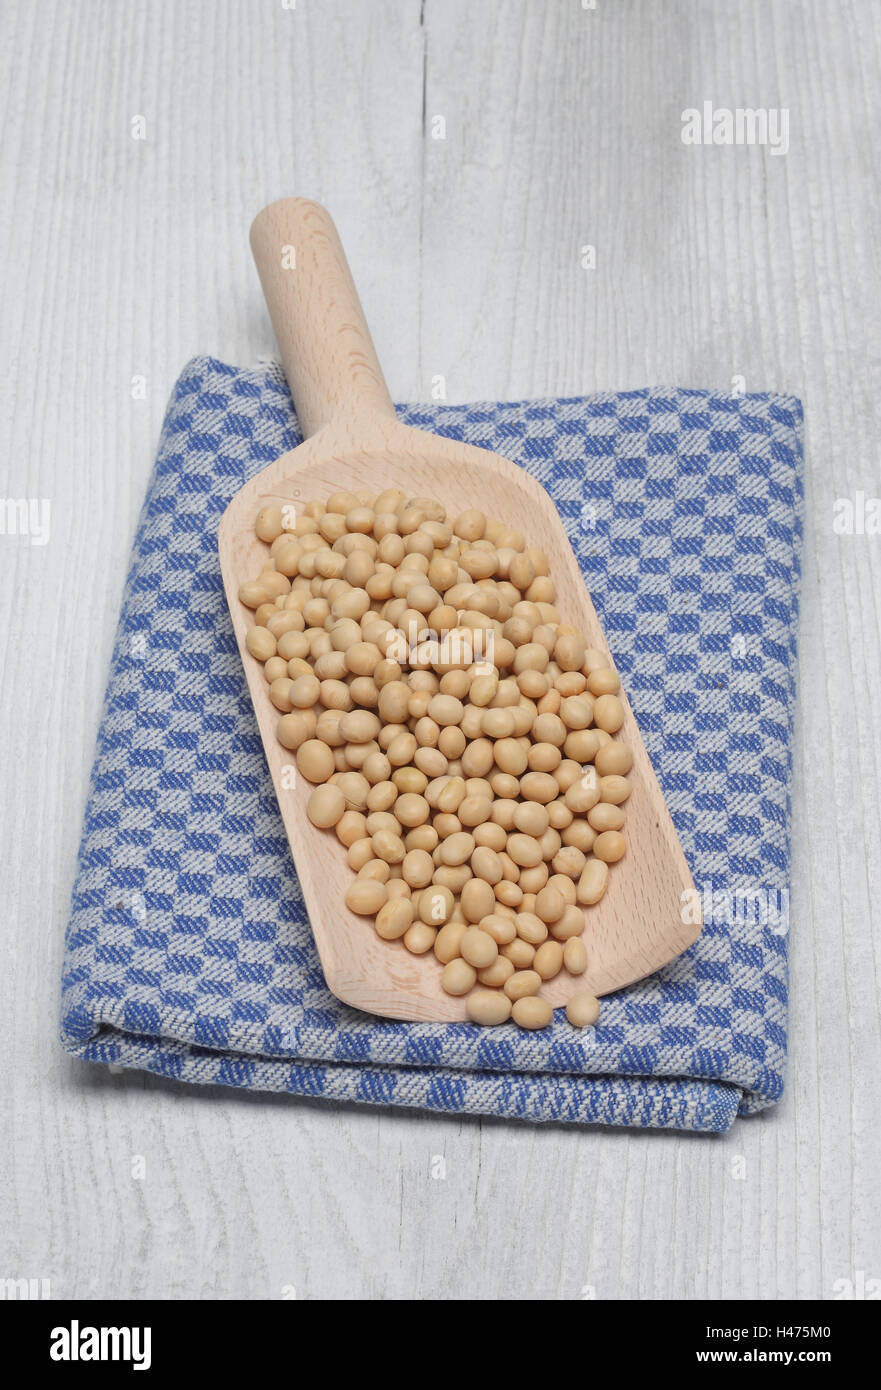 Soybeans, Glycine max, from organic cultivation Stock Photo